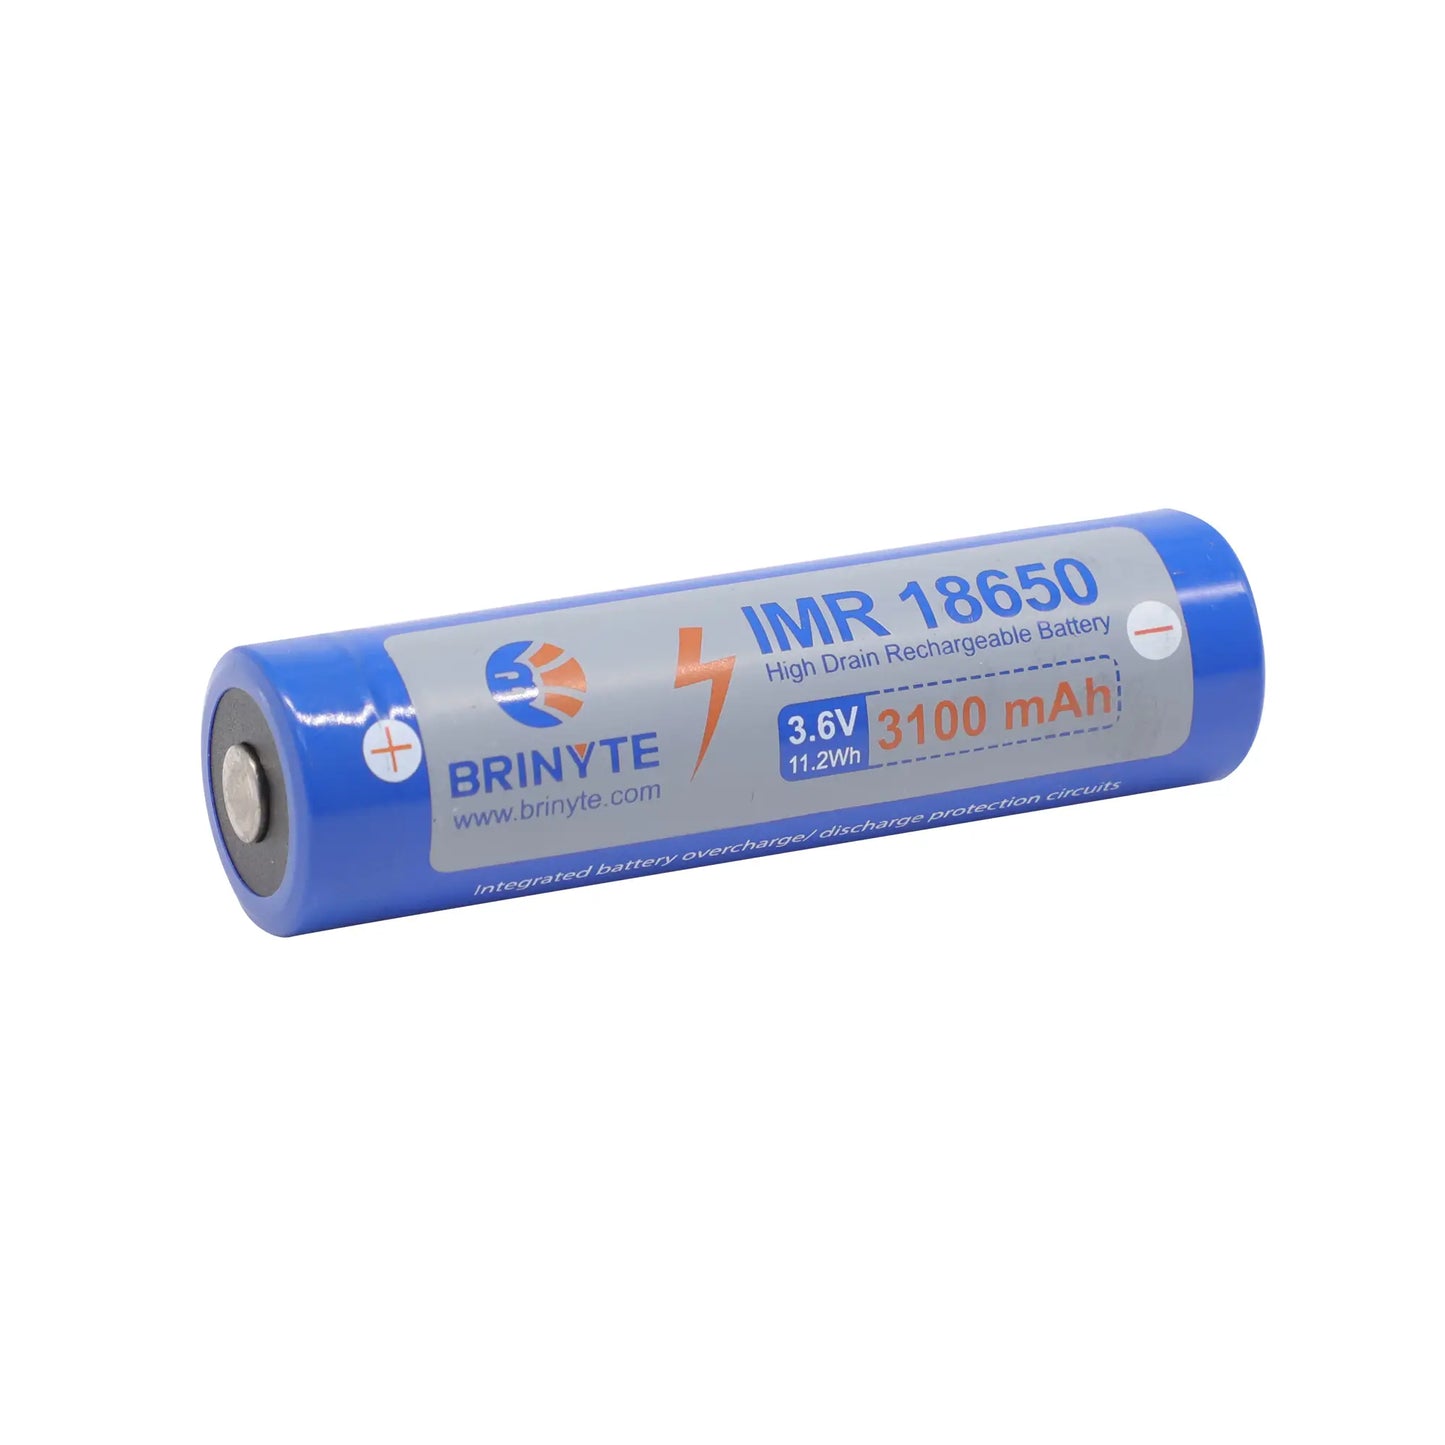 BRINYTE SPARE RECHARGEABLE BATTERY